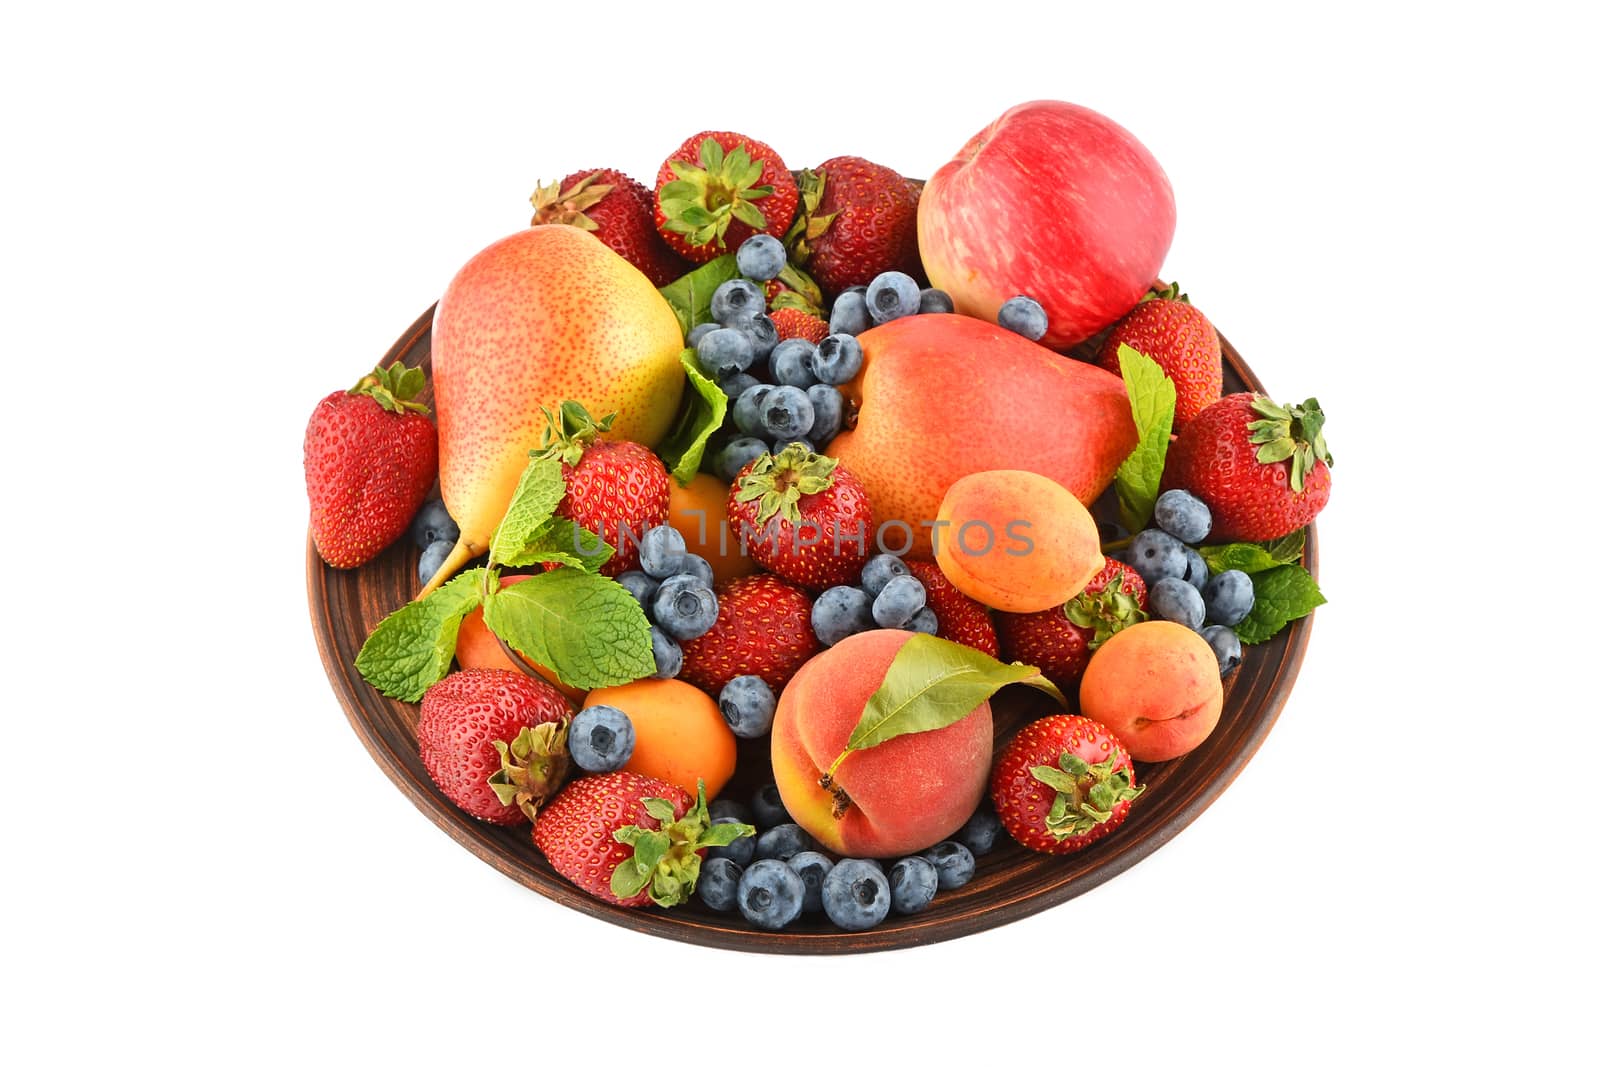 Fruits and berries mix in ceramic plate isolated on white by BreakingTheWalls